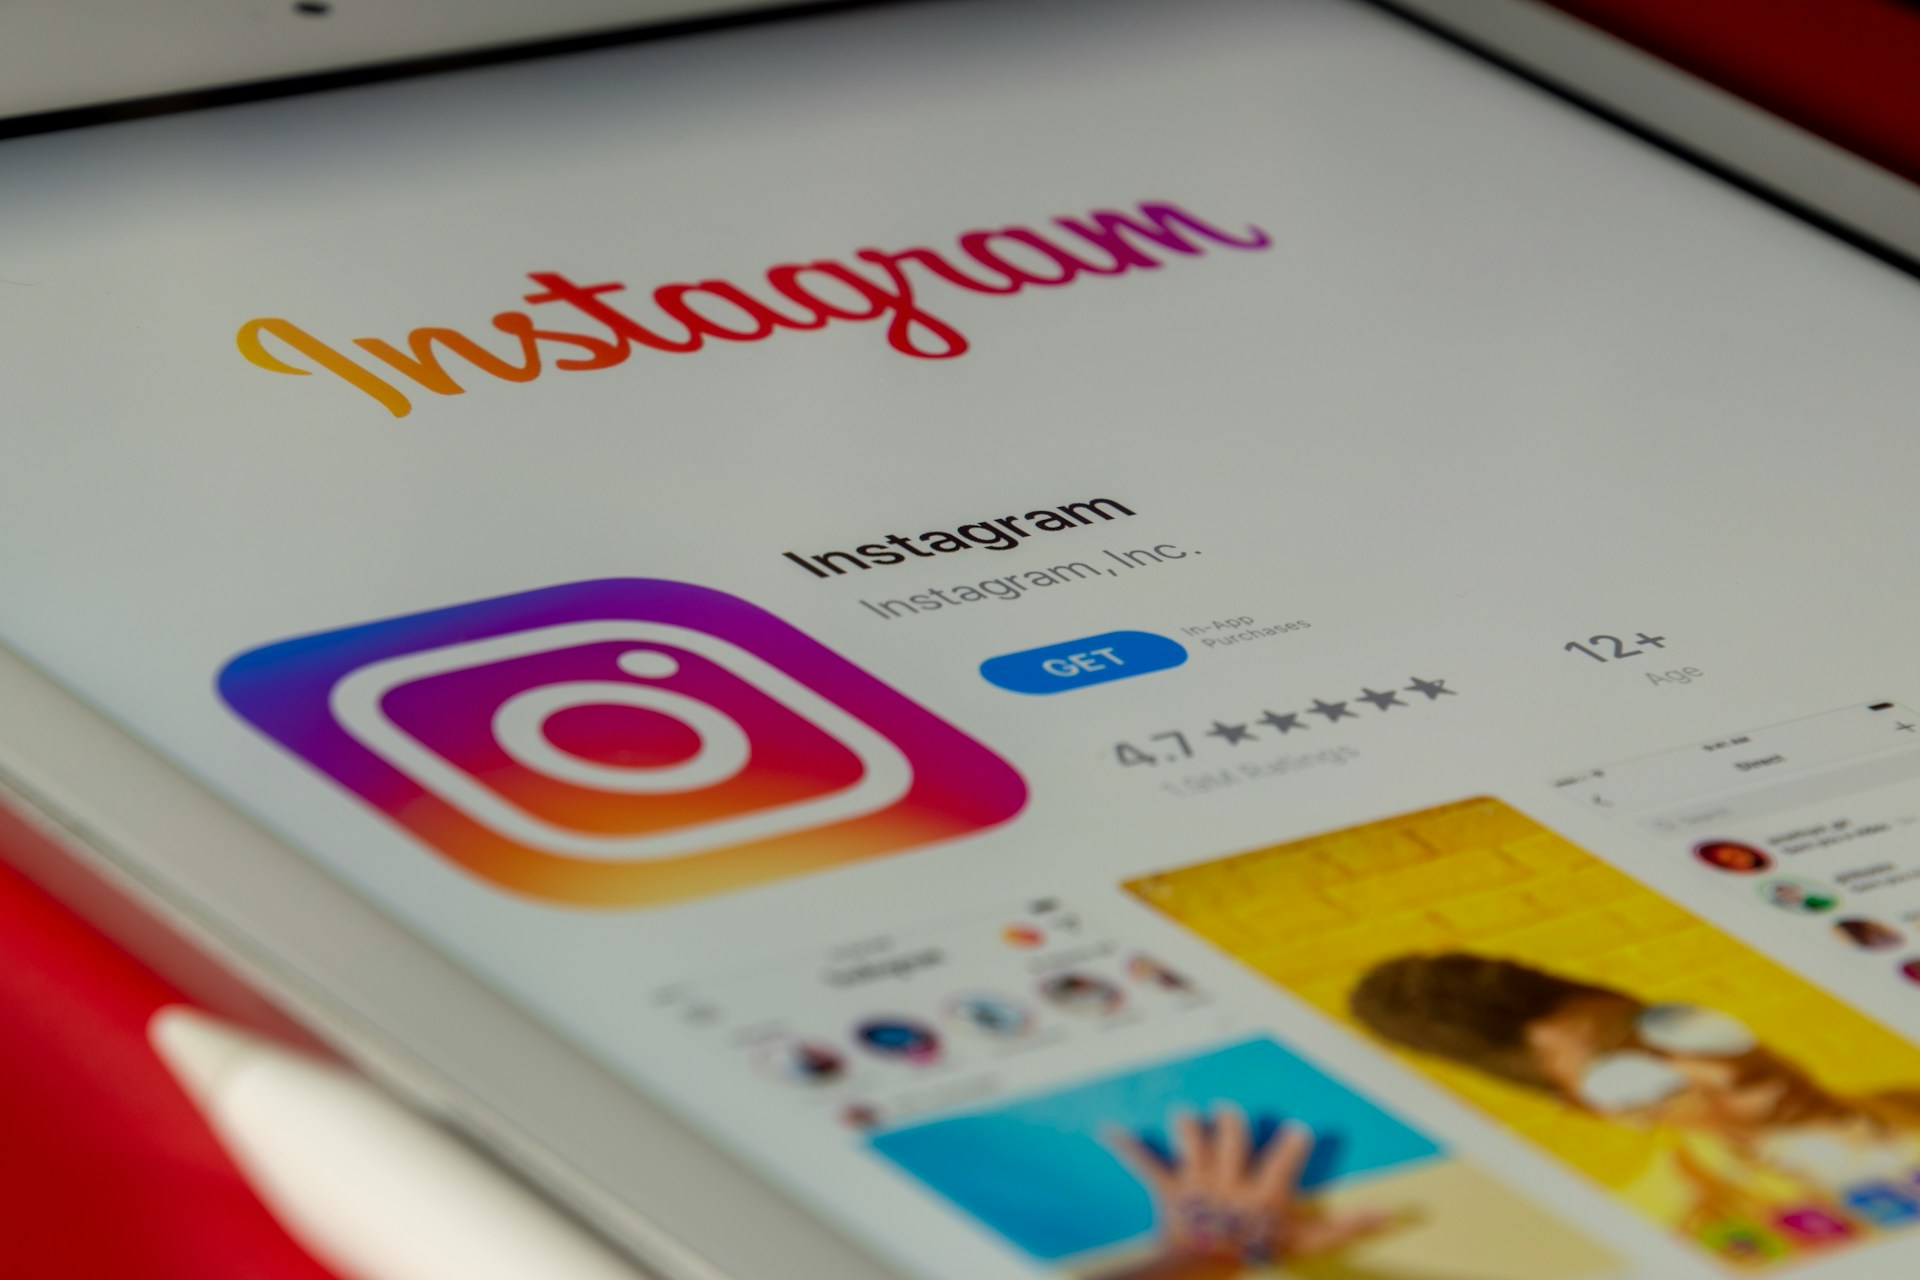 Similar to TikTok’s App Clip, the Instagram version will let users watch a Reel in the app’s native interface even when they don’t have Instagram installed